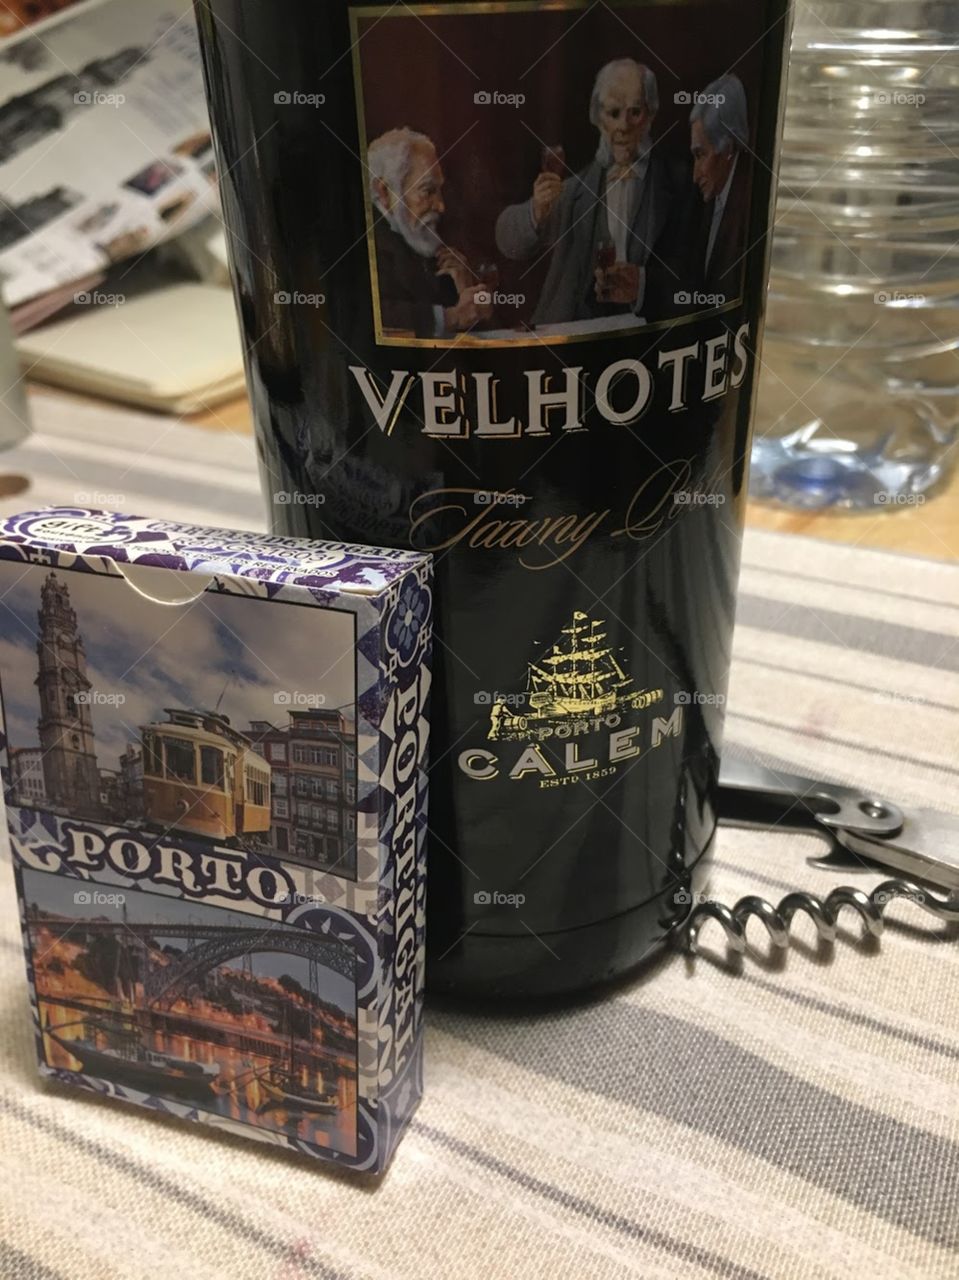 When in Portugal and chill with friends and native get yourself a deck of cards and learn something new. There are different games from around the world. I always love to learn new games, along with a glass of wine for a perfect night. 